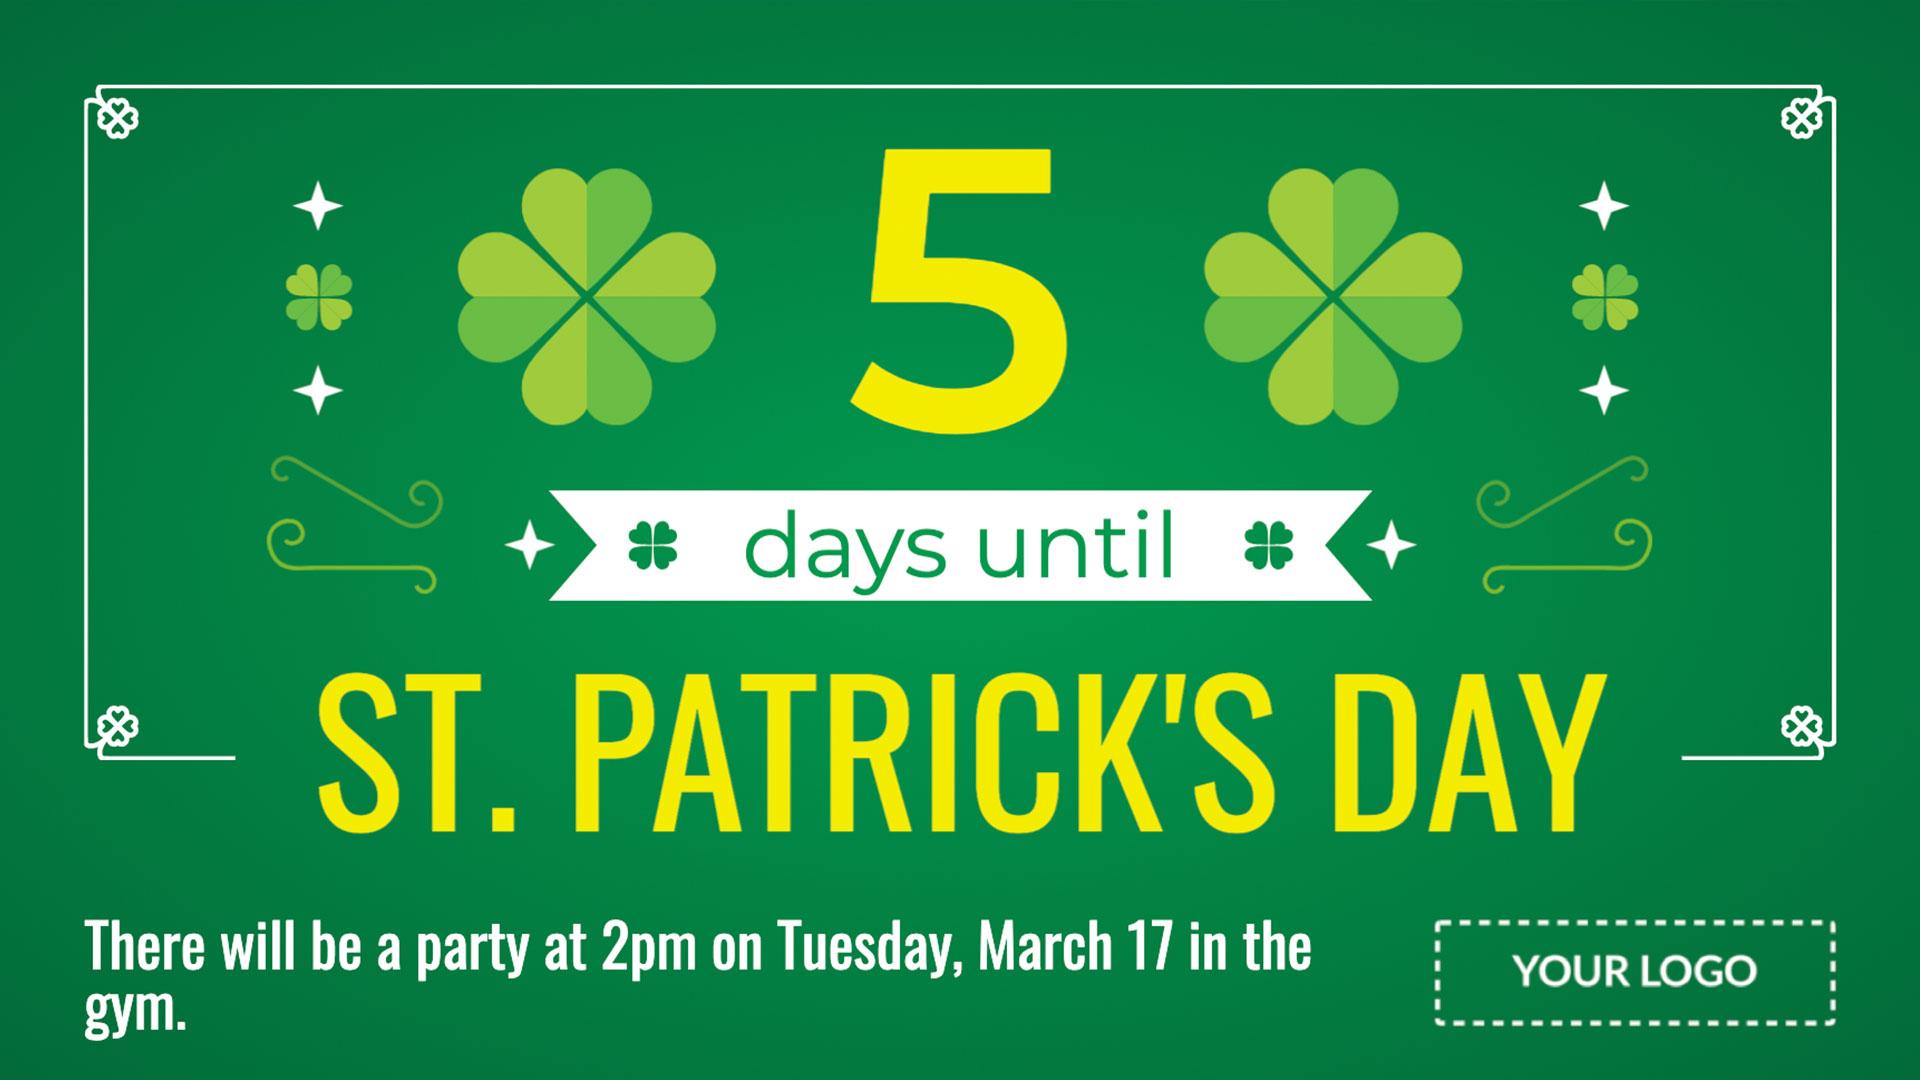 St. Patrick's Day Countdown Digital Signage Template